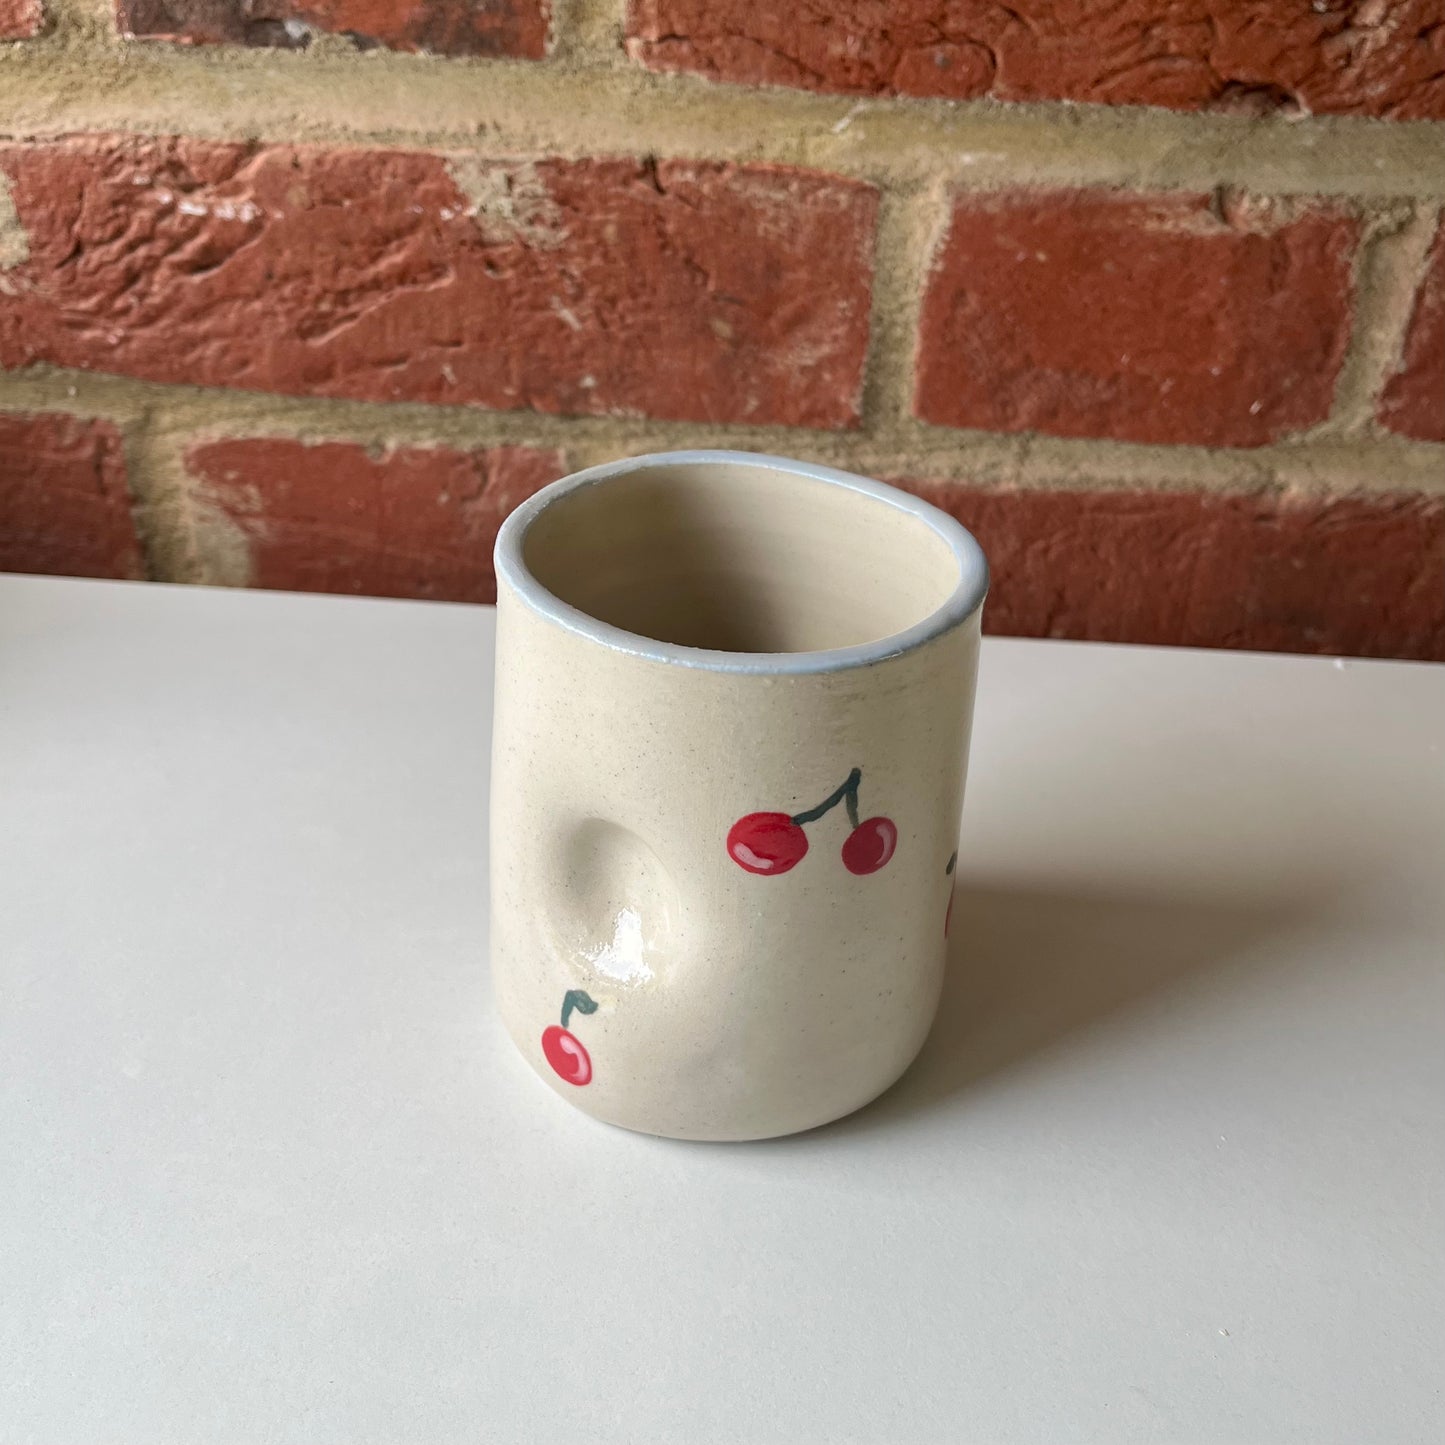 Slightly Imperfect Cherry cup